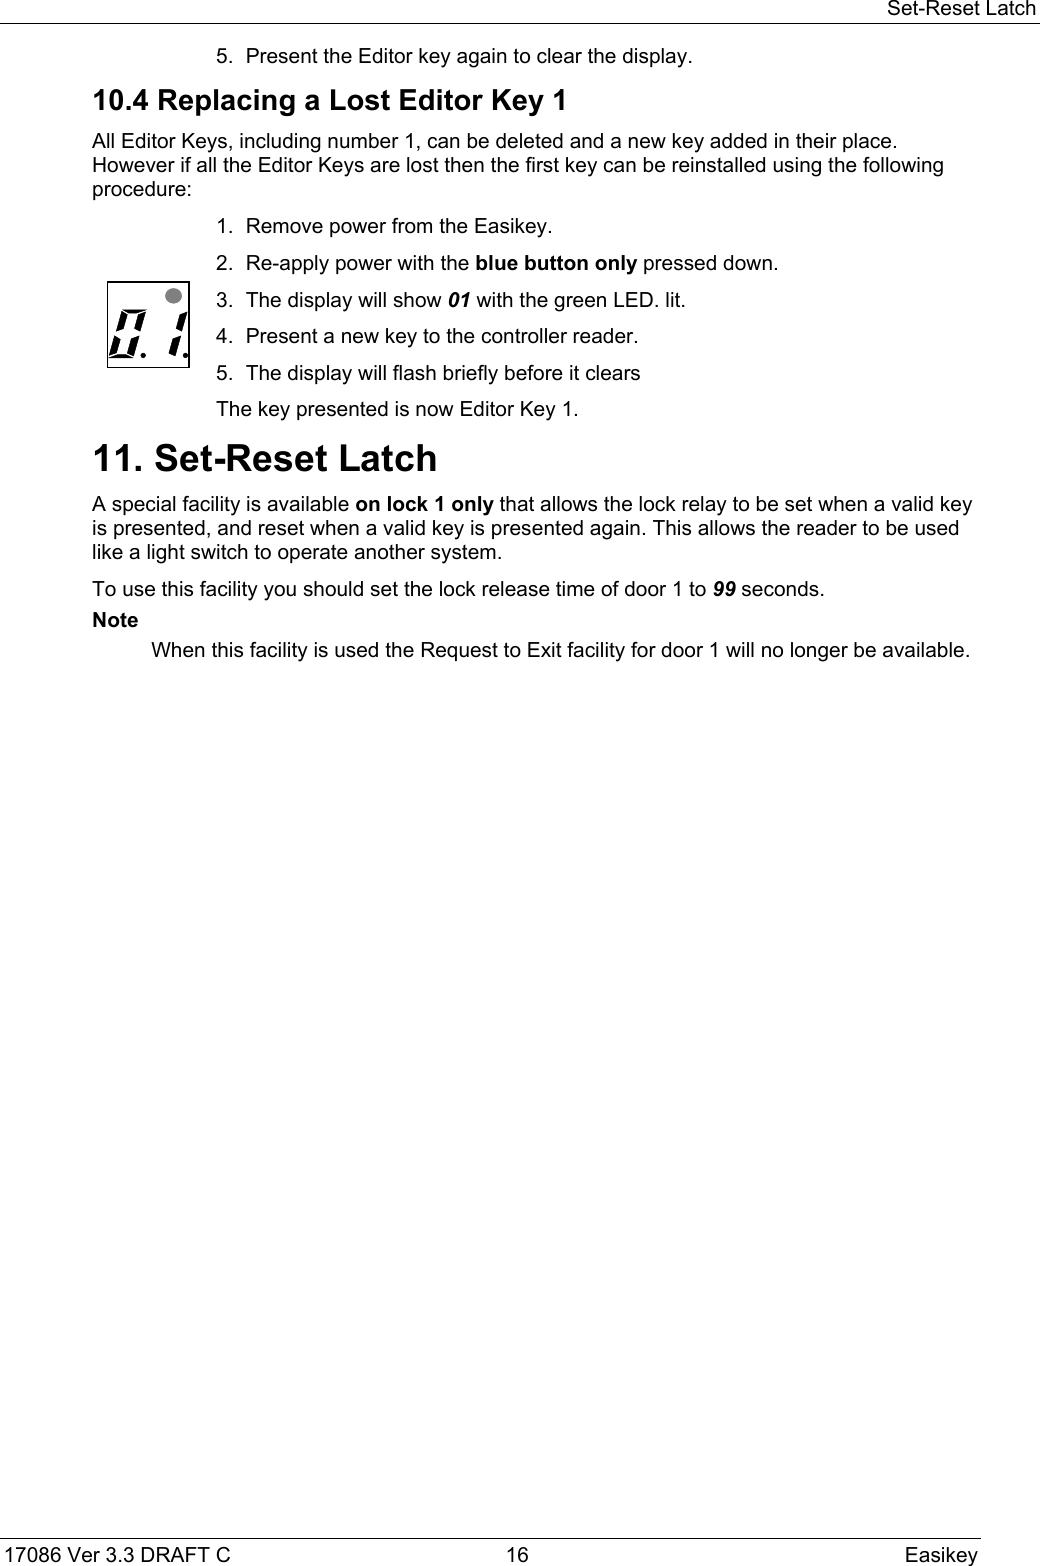 Set-Reset Latch17086 Ver 3.3 DRAFT C  16 Easikey5. Present the Editor key again to clear the display.10.4 Replacing a Lost Editor Key 1All Editor Keys, including number 1, can be deleted and a new key added in their place.However if all the Editor Keys are lost then the first key can be reinstalled using the followingprocedure:1. Remove power from the Easikey.2. Re-apply power with the blue button only pressed down.  3. The display will show 01 with the green LED. lit.4. Present a new key to the controller reader.5. The display will flash briefly before it clearsThe key presented is now Editor Key 1.11. Set-Reset LatchA special facility is available on lock 1 only that allows the lock relay to be set when a valid keyis presented, and reset when a valid key is presented again. This allows the reader to be usedlike a light switch to operate another system.To use this facility you should set the lock release time of door 1 to 99 seconds.NoteWhen this facility is used the Request to Exit facility for door 1 will no longer be available.